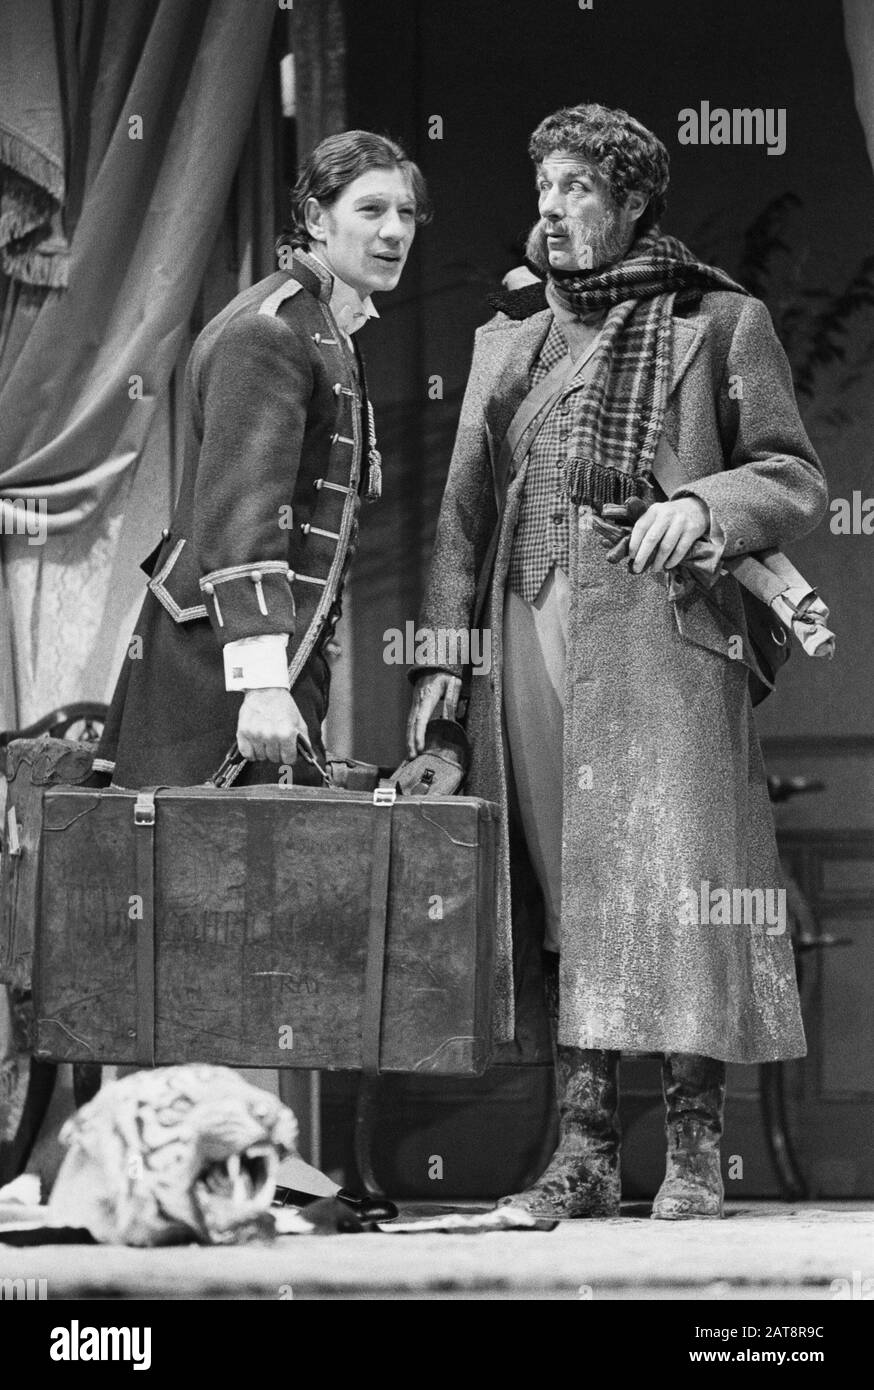 Ian McKellen (Lady Wishfort's Footman) and John Woodvine (Sir Wilful Witwoud) in THE WAY OF THE WORLD by William Congreve directed by David William for the Actors Company UK Tour in 1973. Sir Ian Murray McKellen, born 1939, Burnley, England. English stage and film actor. Co-founder of Stonewall, gay rights activist, knighted in 1990, made a Companion of Honour 2007. Stock Photo